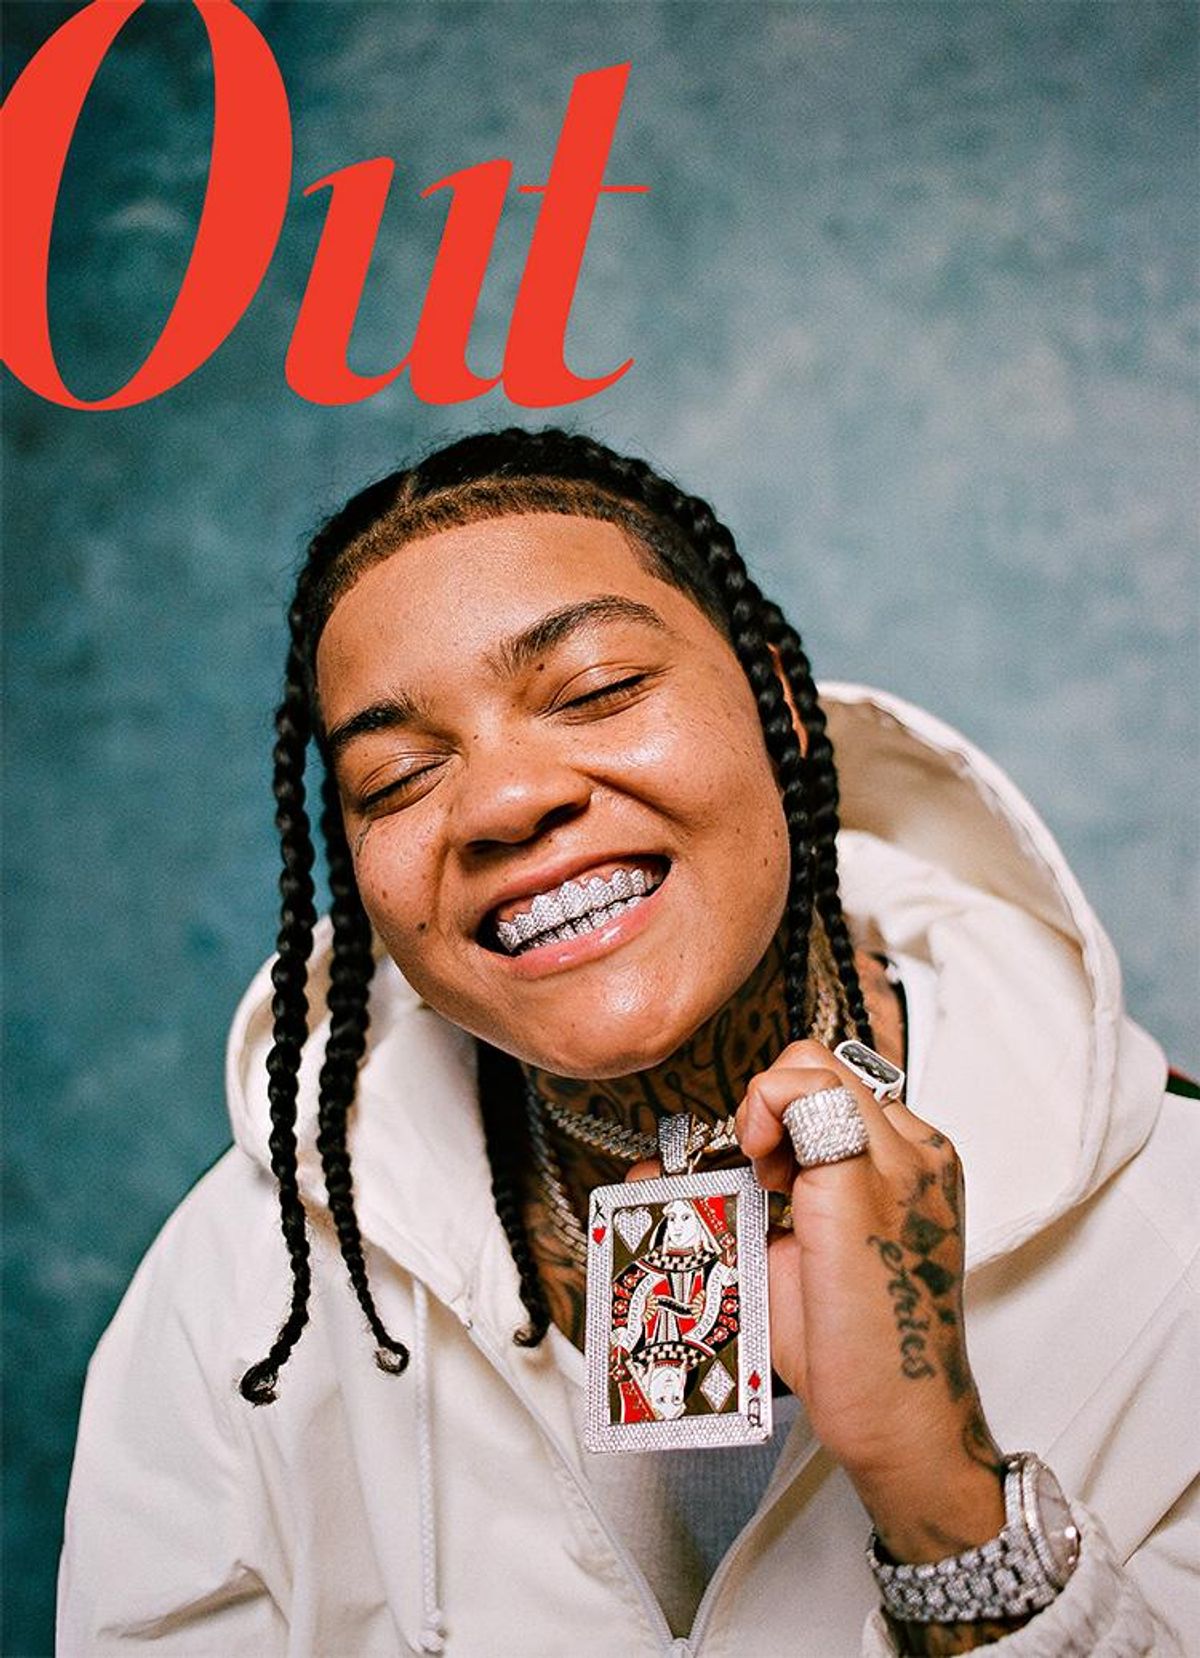 Rapper of the Year: YOUNG MA